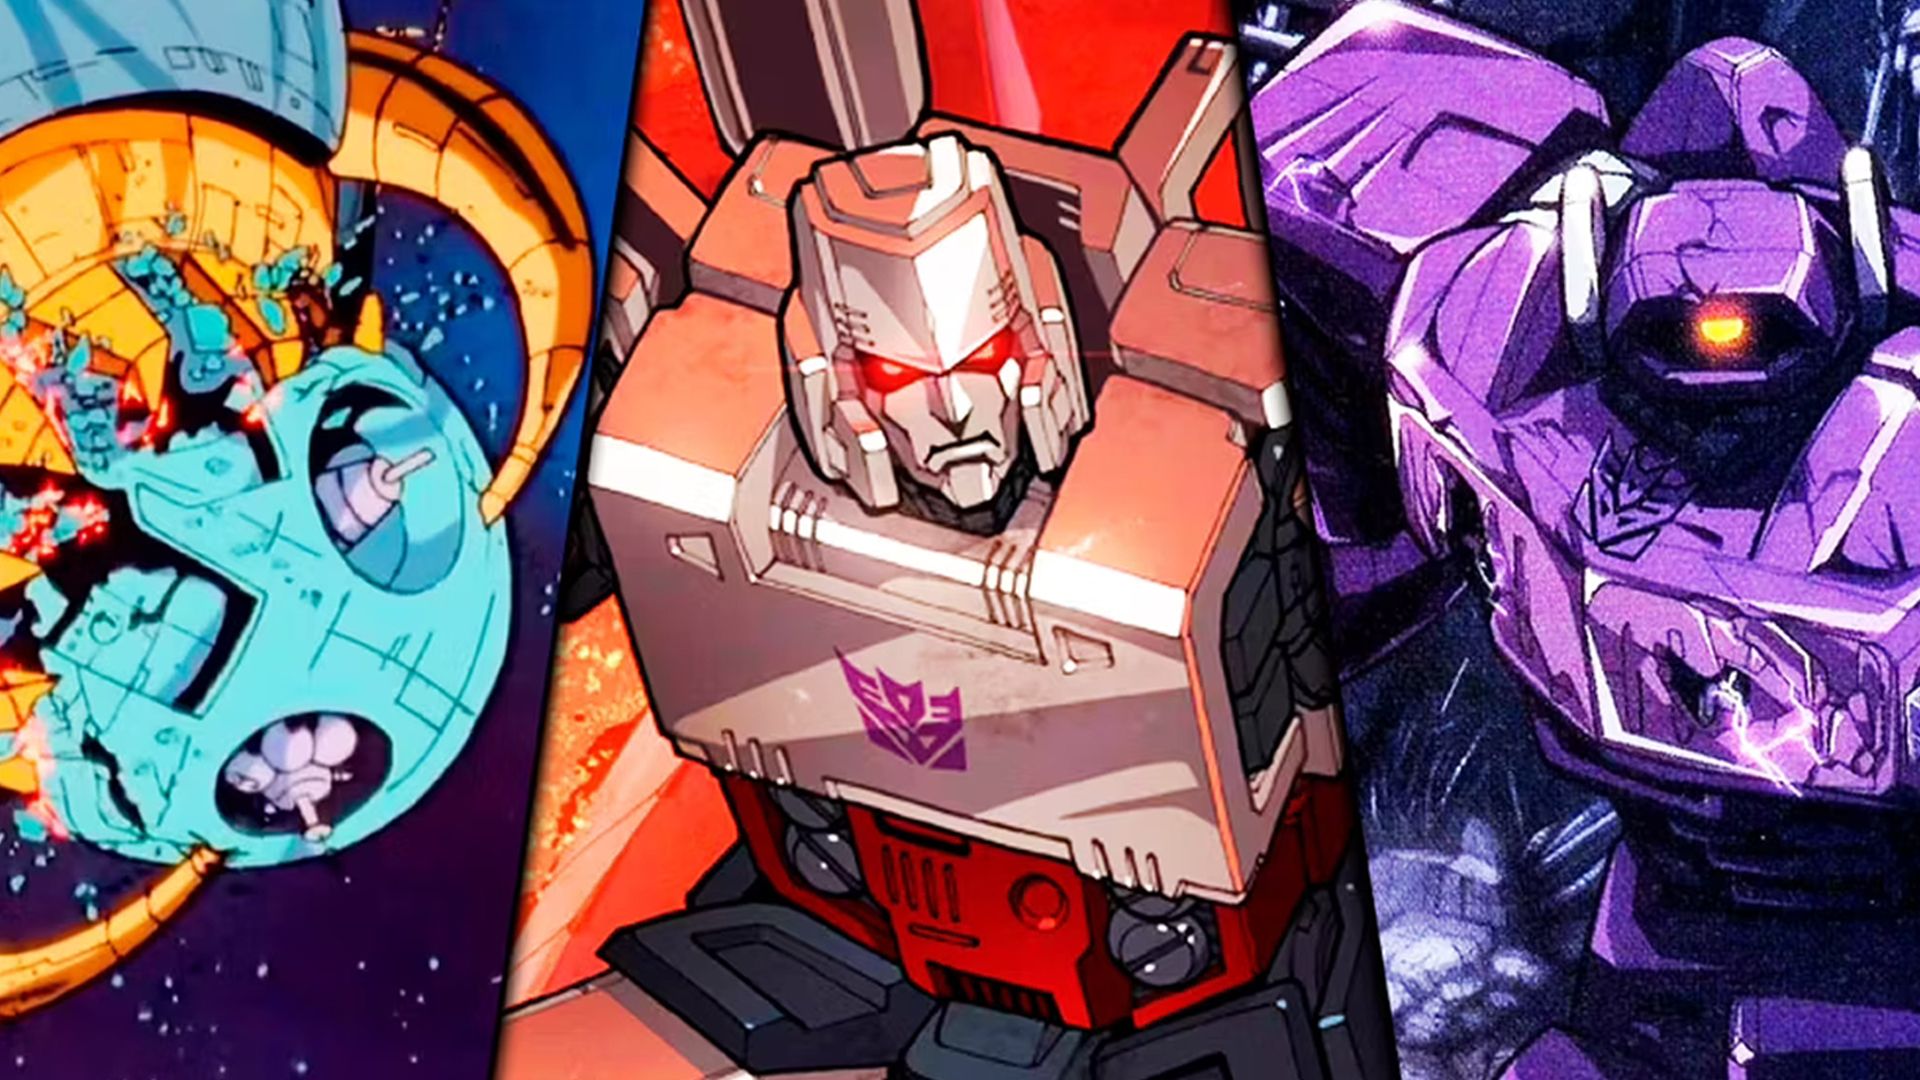 Strongest Transformers, Ranked